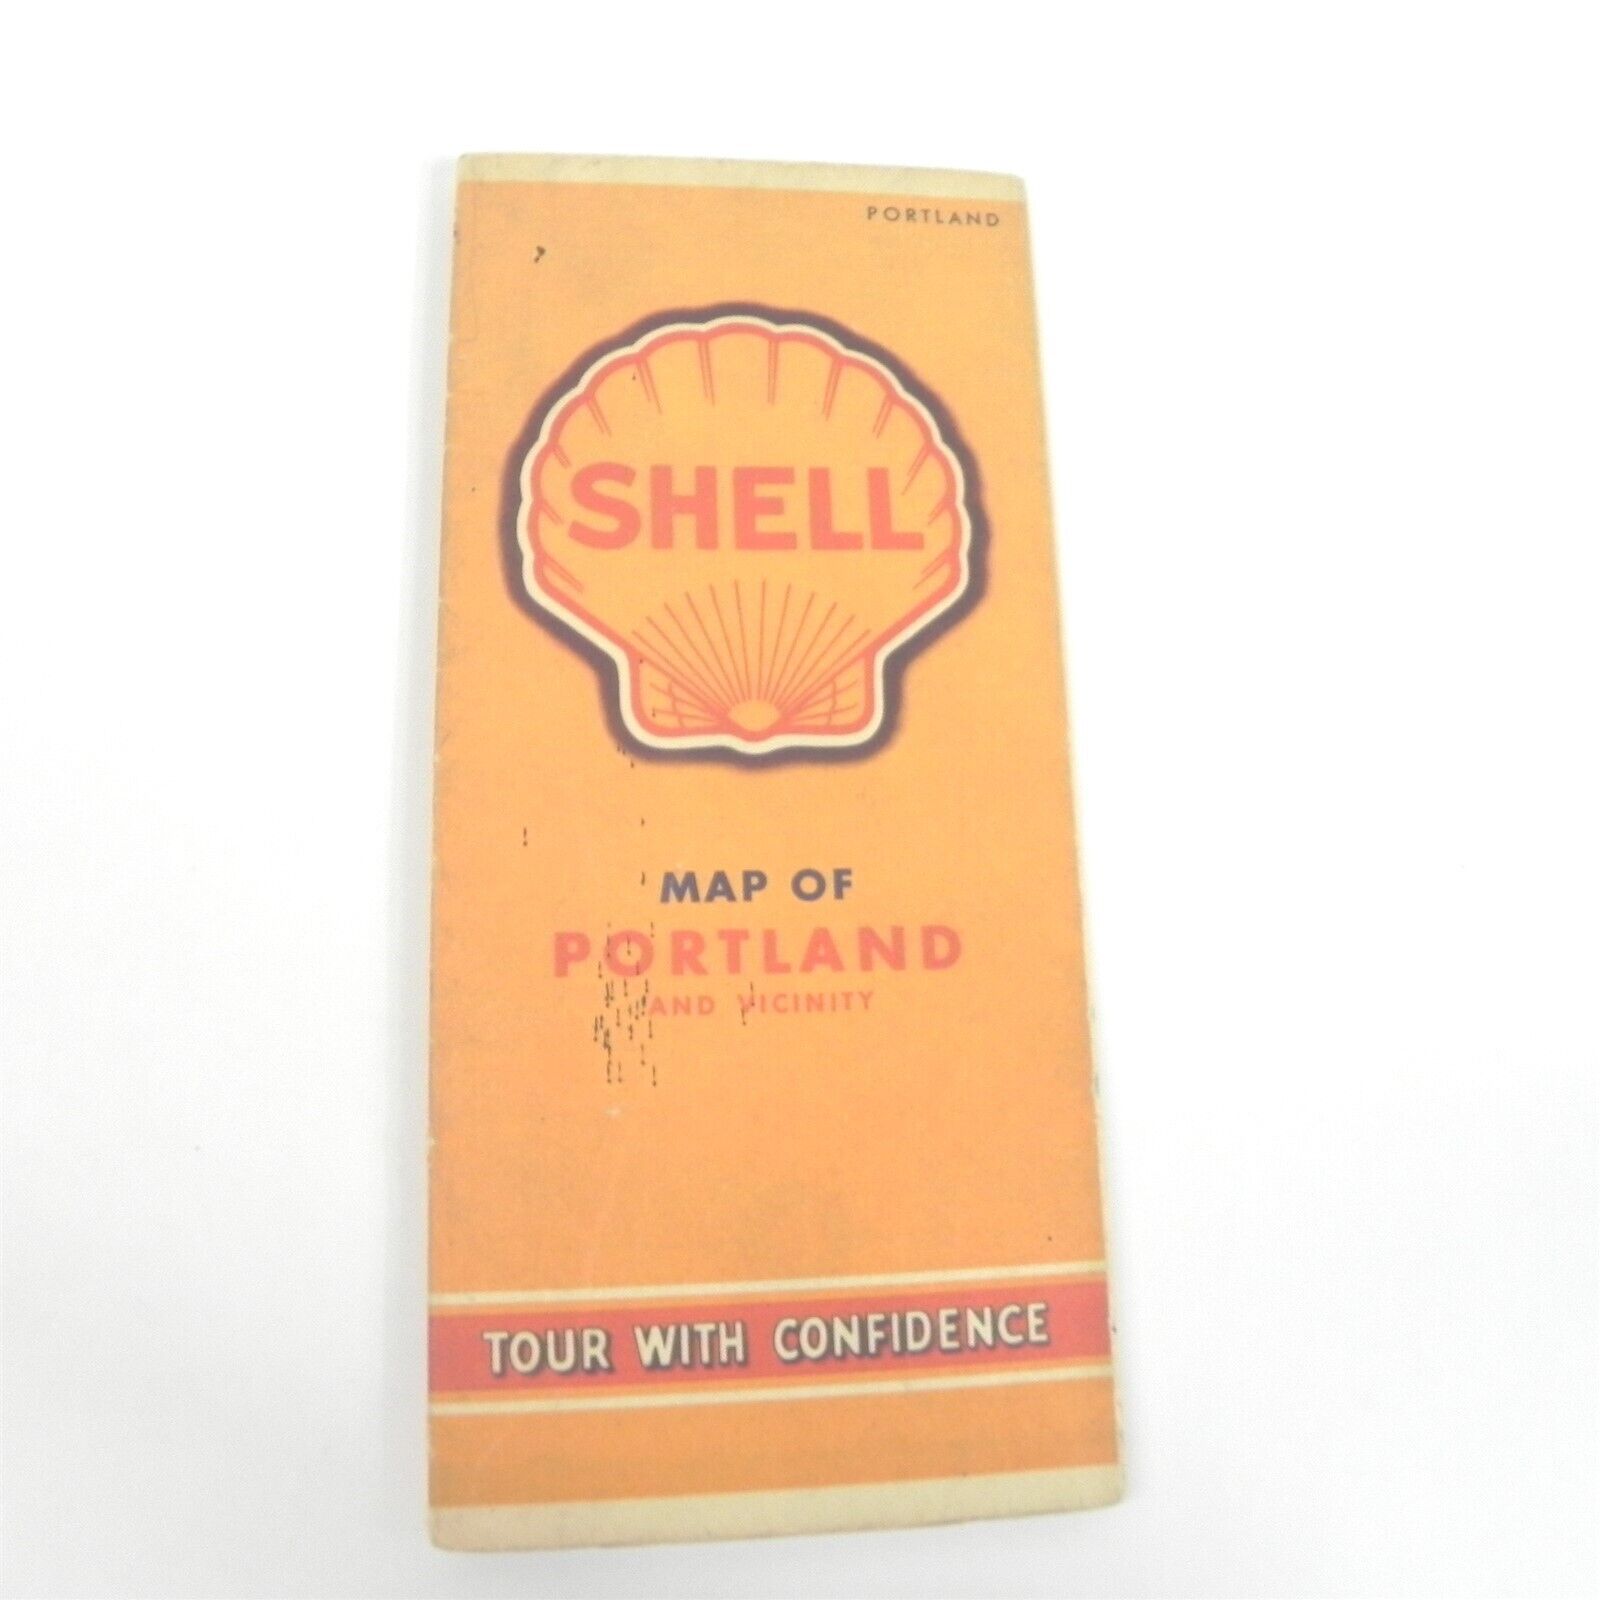 VINTAGE 1946 SHELL OIL COMPANY MAP OF PORTLAND OREGON TOURING GUIDE GAS OIL